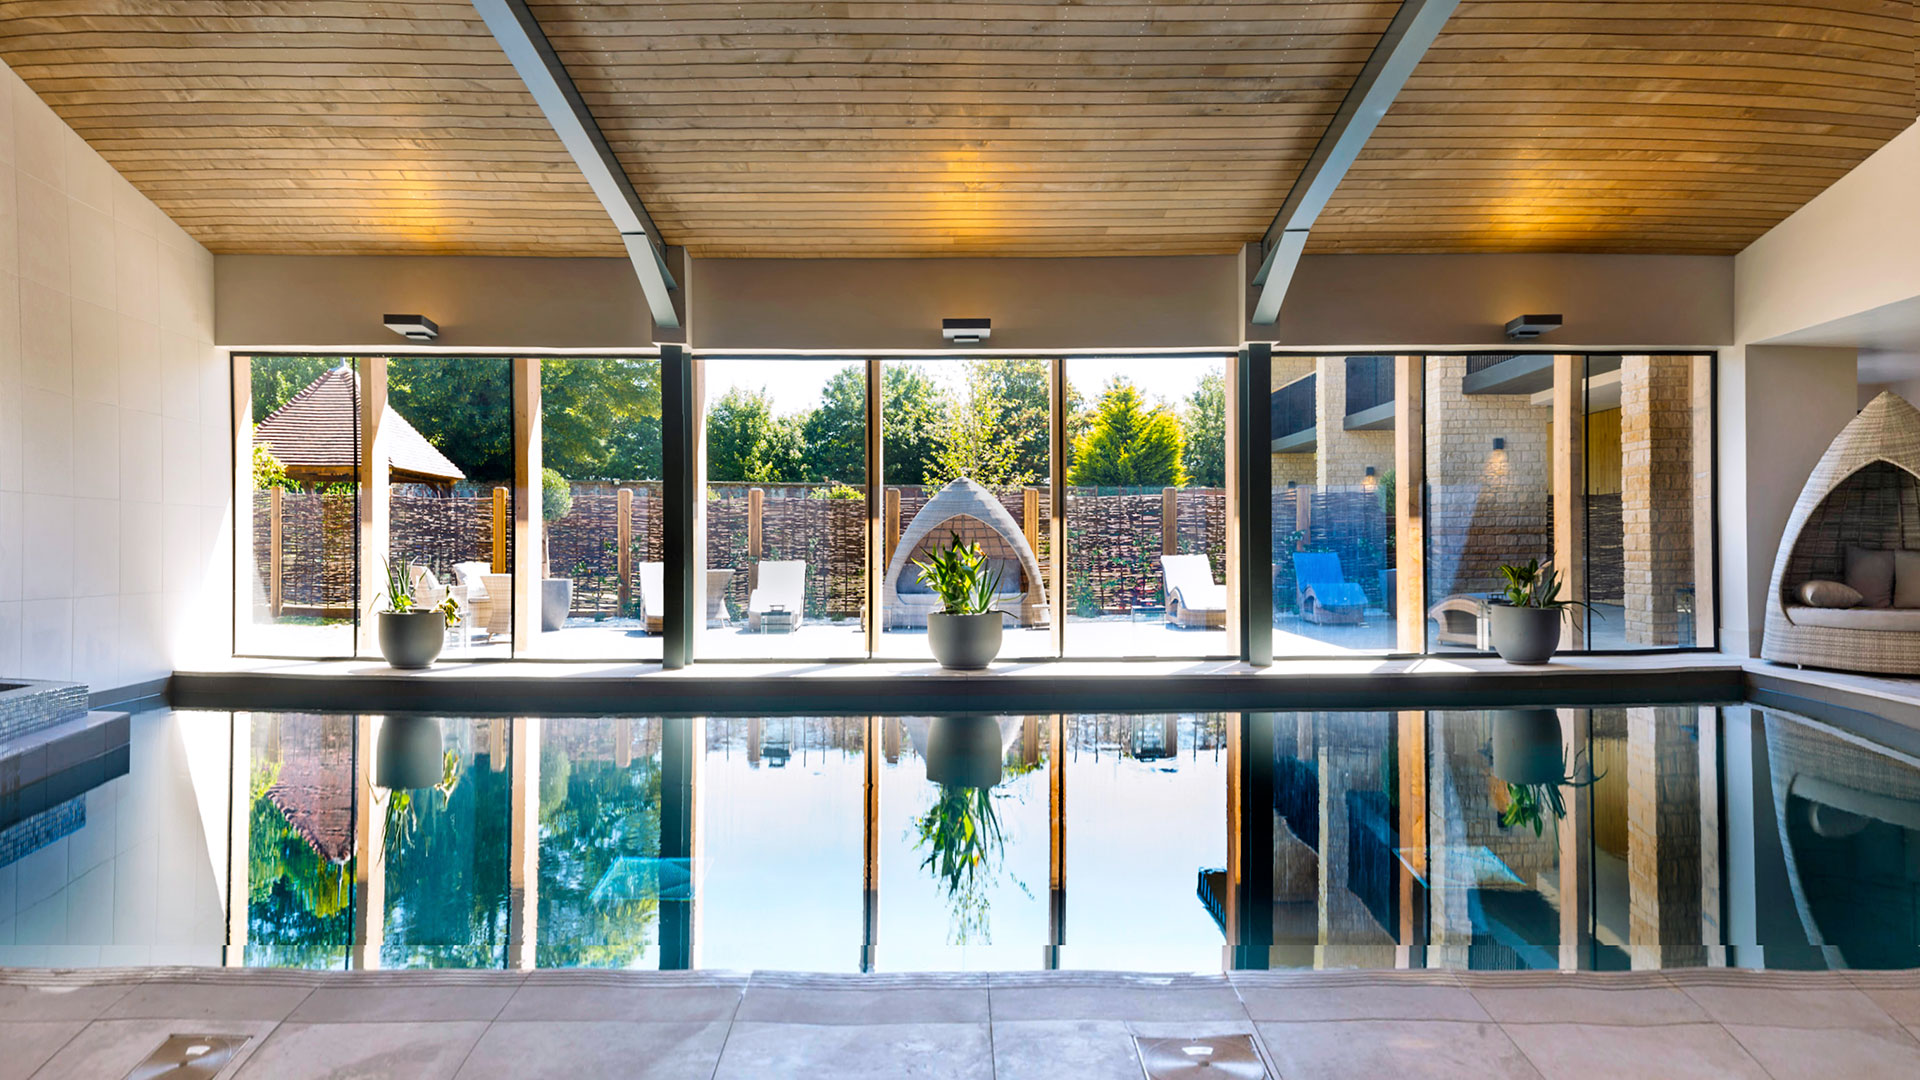 Indoor pool with comfortable seating and views to the courtyard - Hatherley Manor Hotel & Spa, Cotswolds